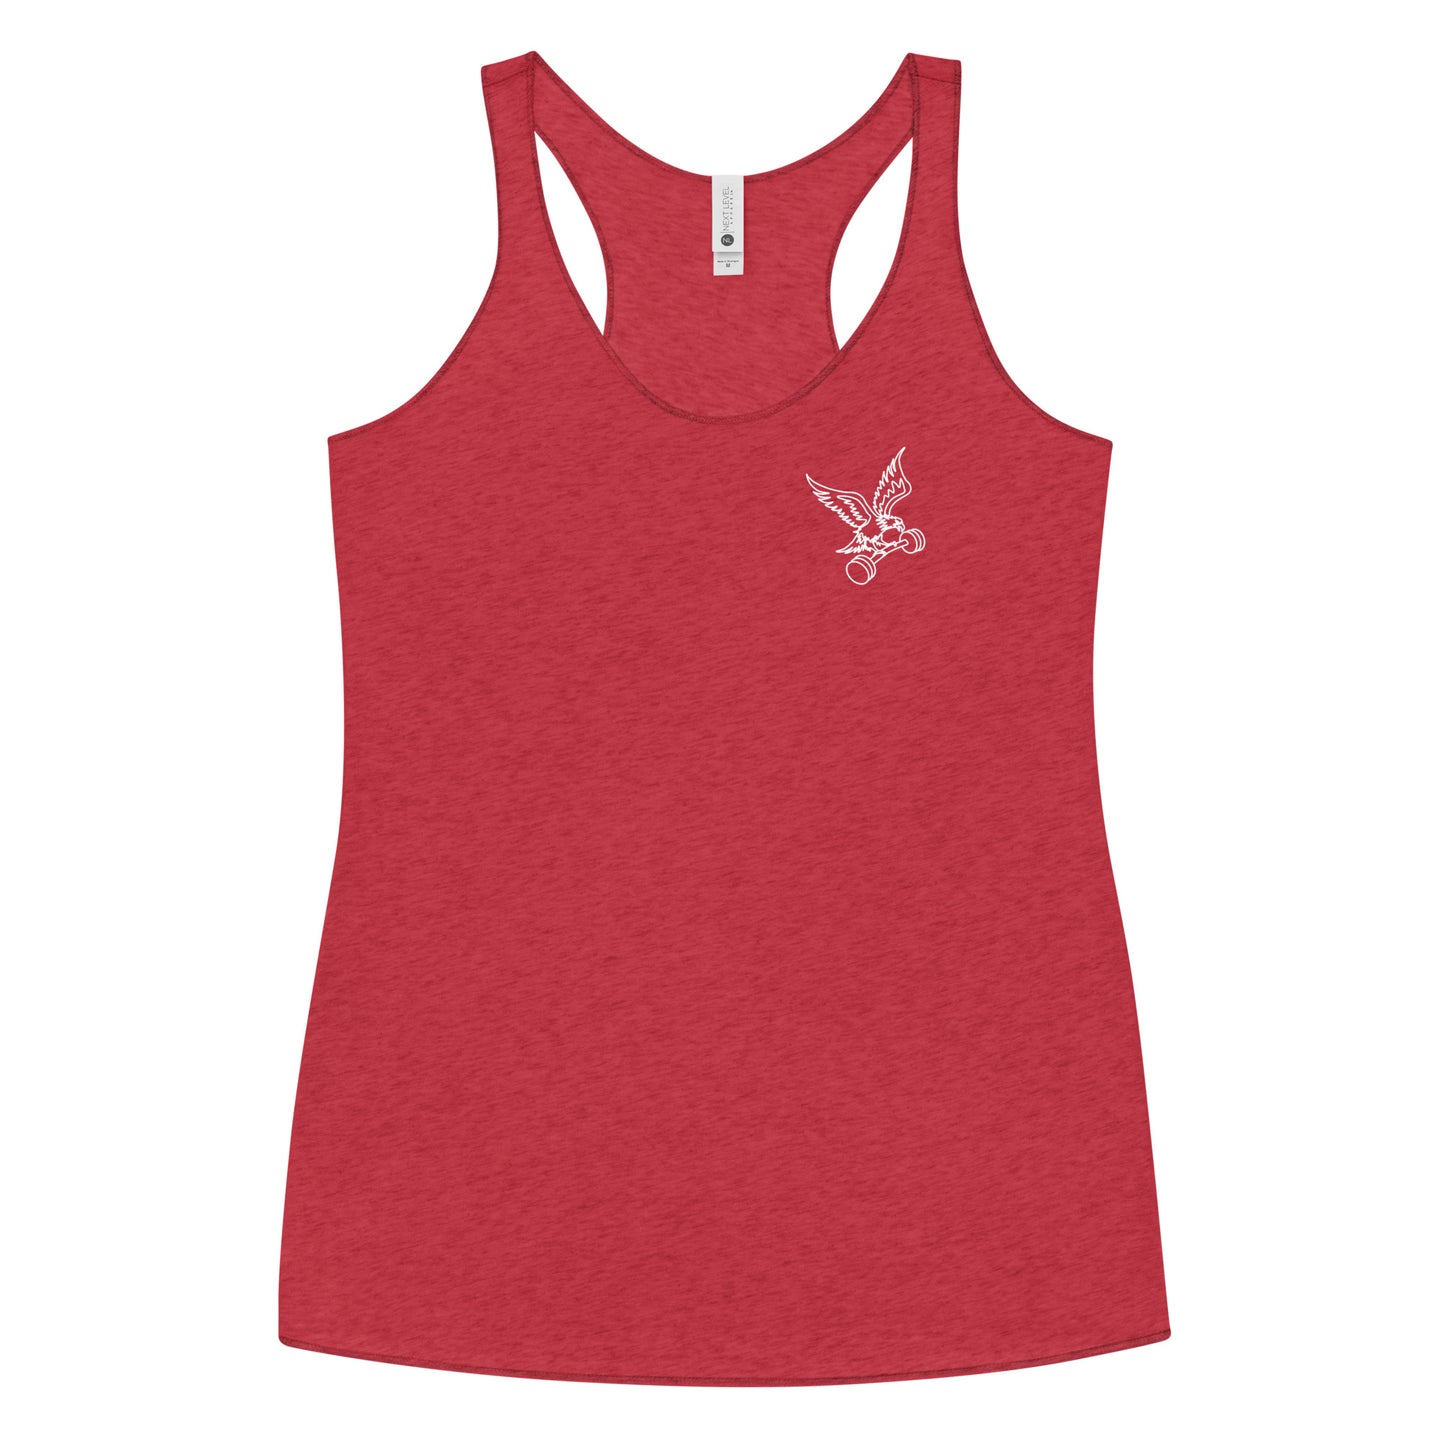 Women's Left-Chest Barbell Eagle Racerback Tank in Vintage Red